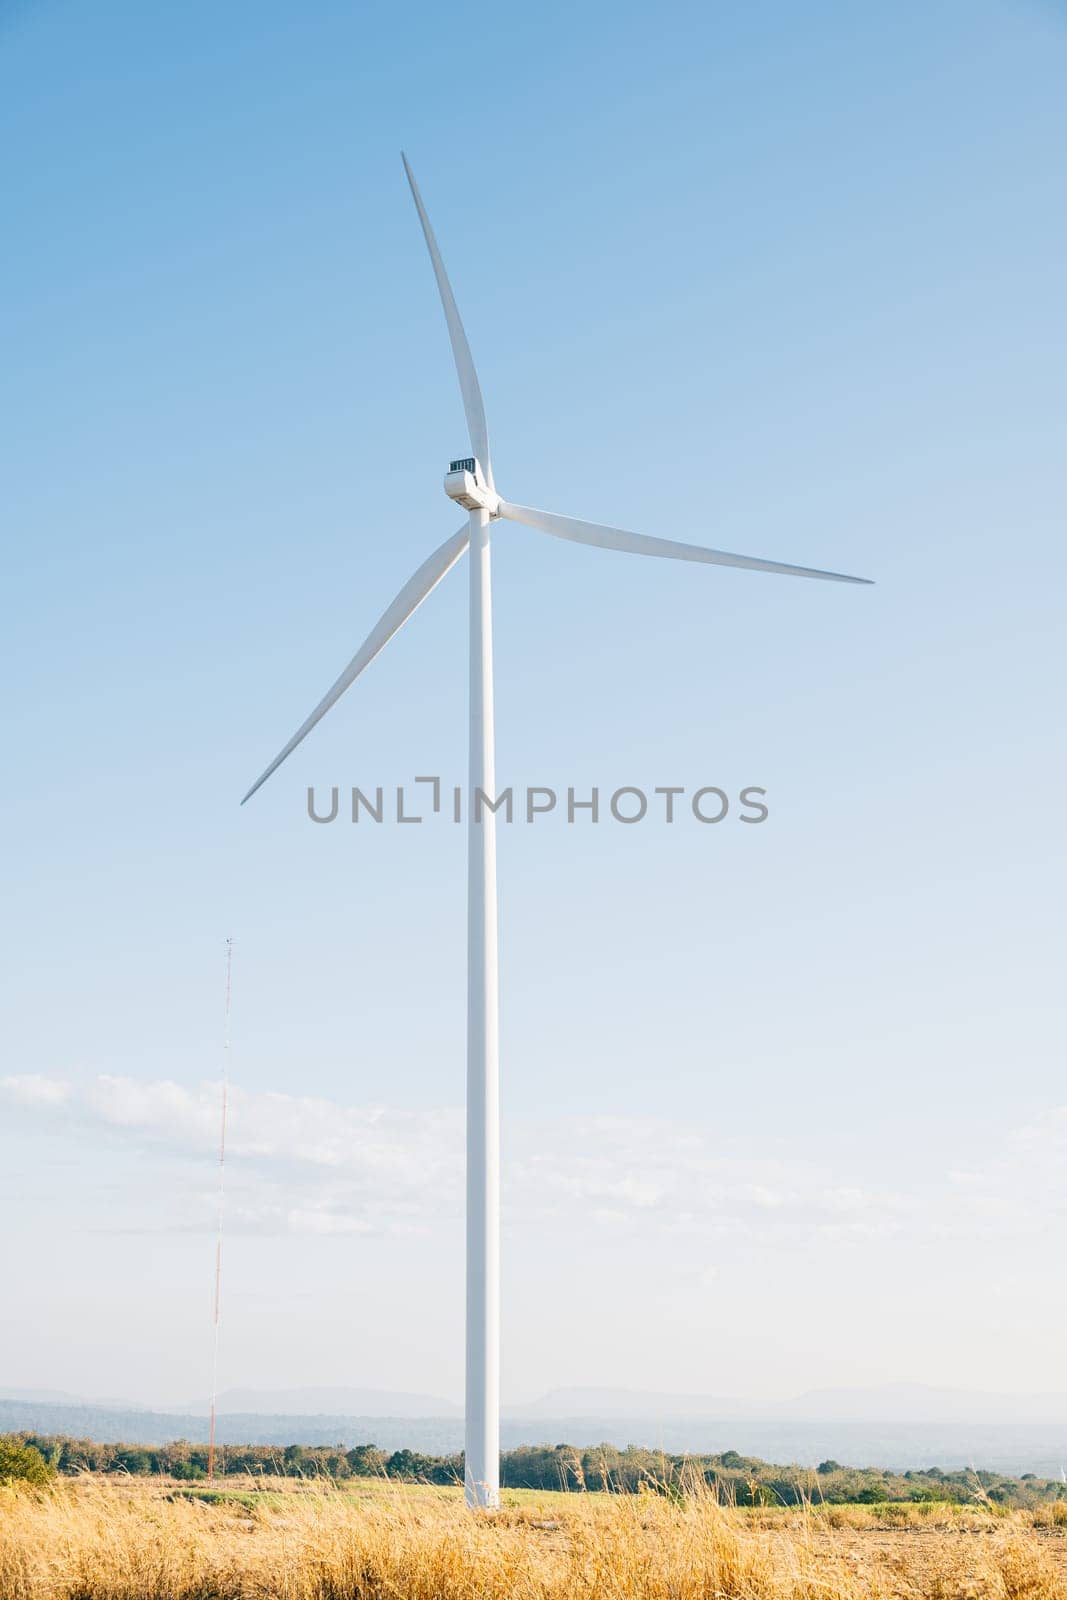 Atop a mountain windmill farm turbines turn in sync with nature generating clean energy. Modern wind technology supporting sustainable development under a serene blue sky.